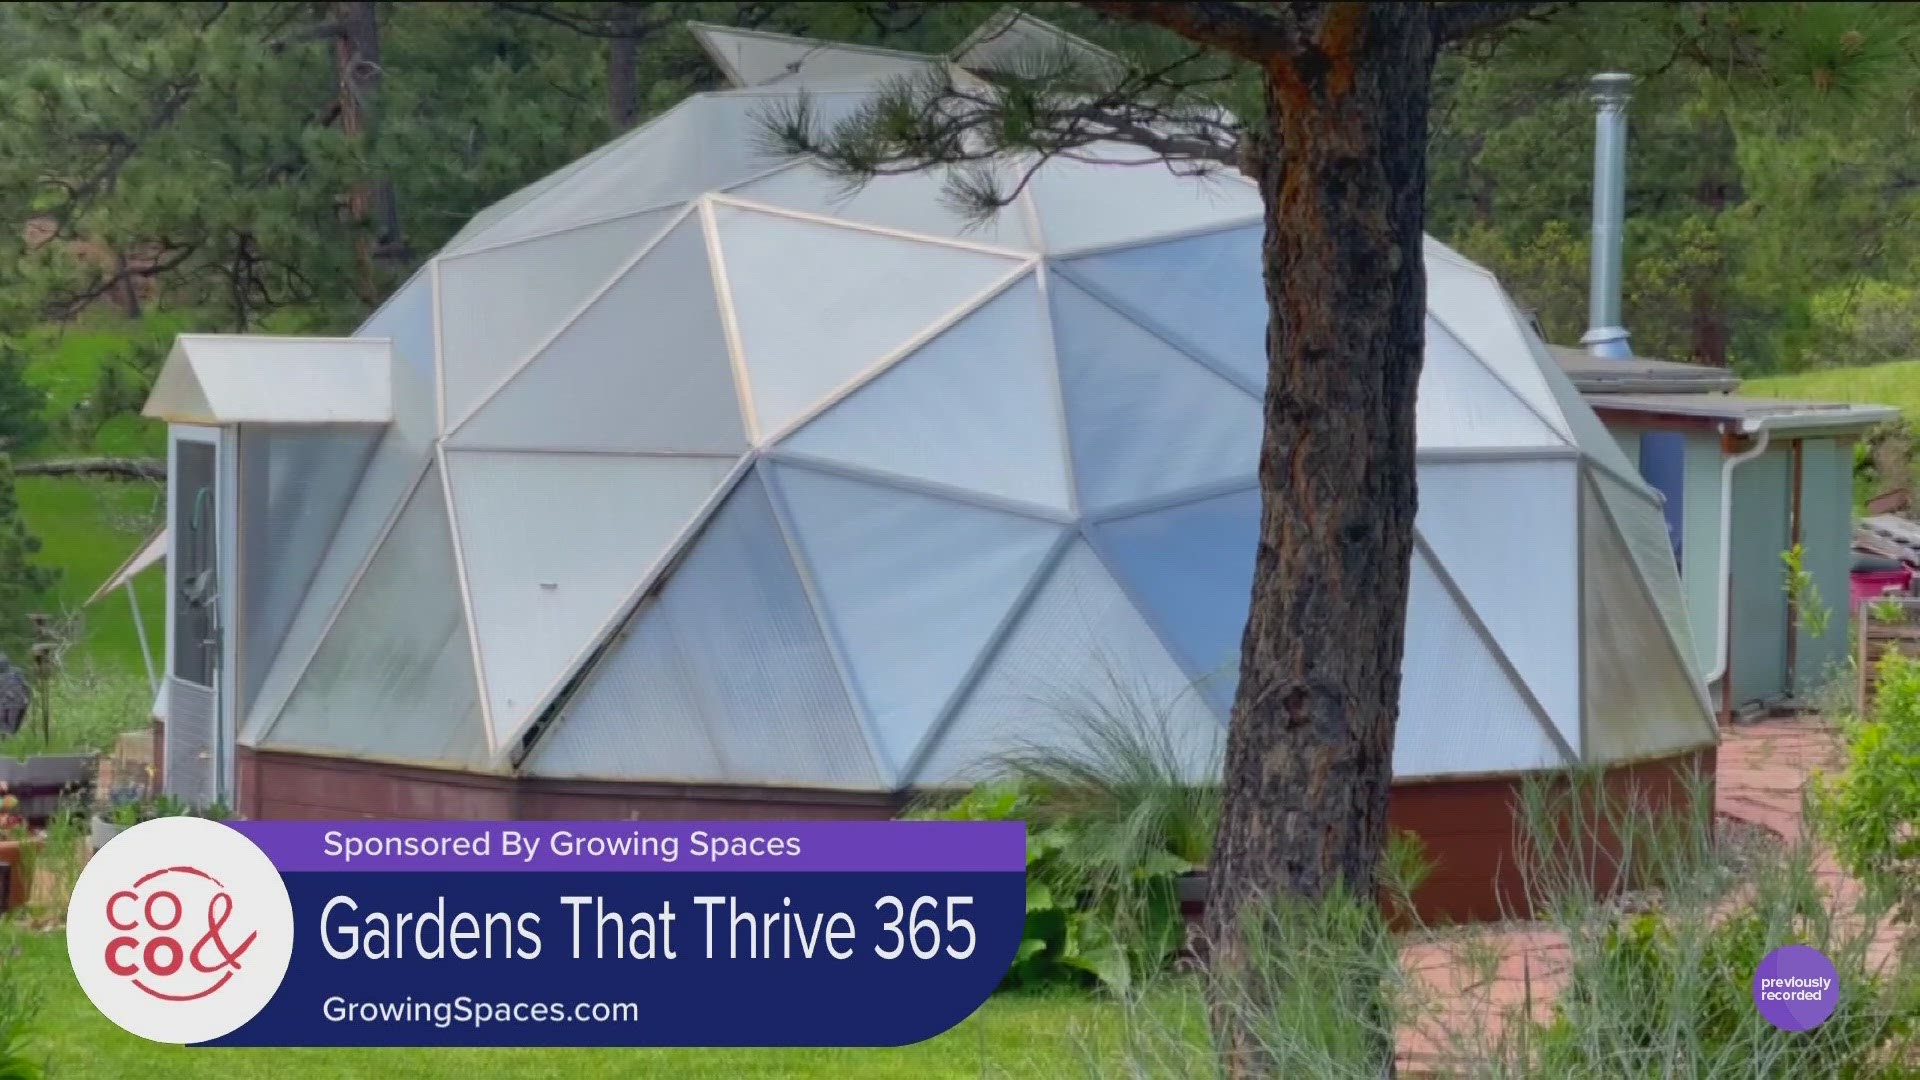 Expand your Colorado growing season with a geodesic dome from Growing spaces. Visit GrowingSpaces.com to see the options and hear more testimonials. *PAID CONTENT*